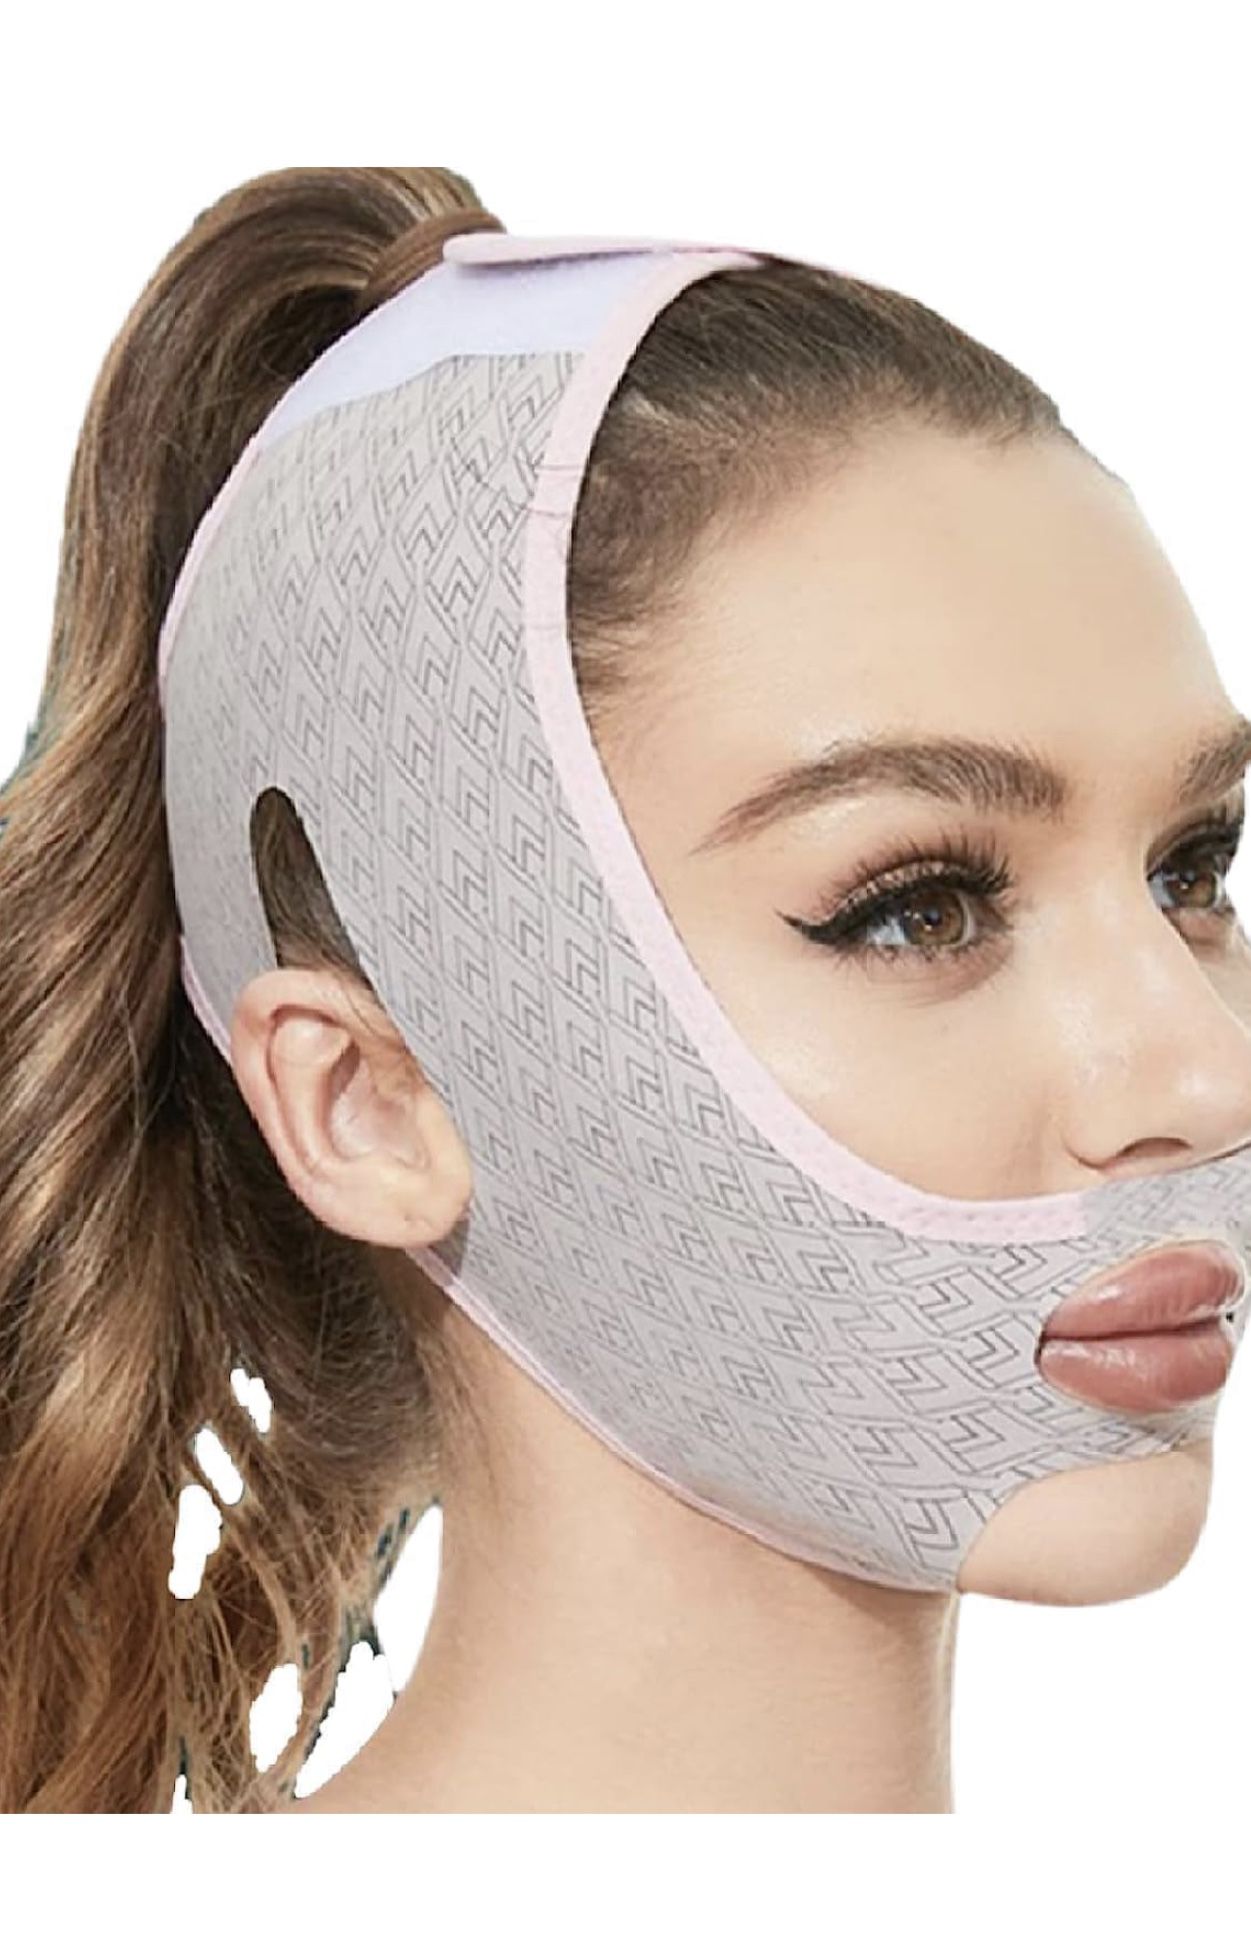 FUIART Beauty Face Sculpting Sleep Mask, Chin Strap for Double Chin for Woman, V-Line Shaping Face Masks (1Pack)